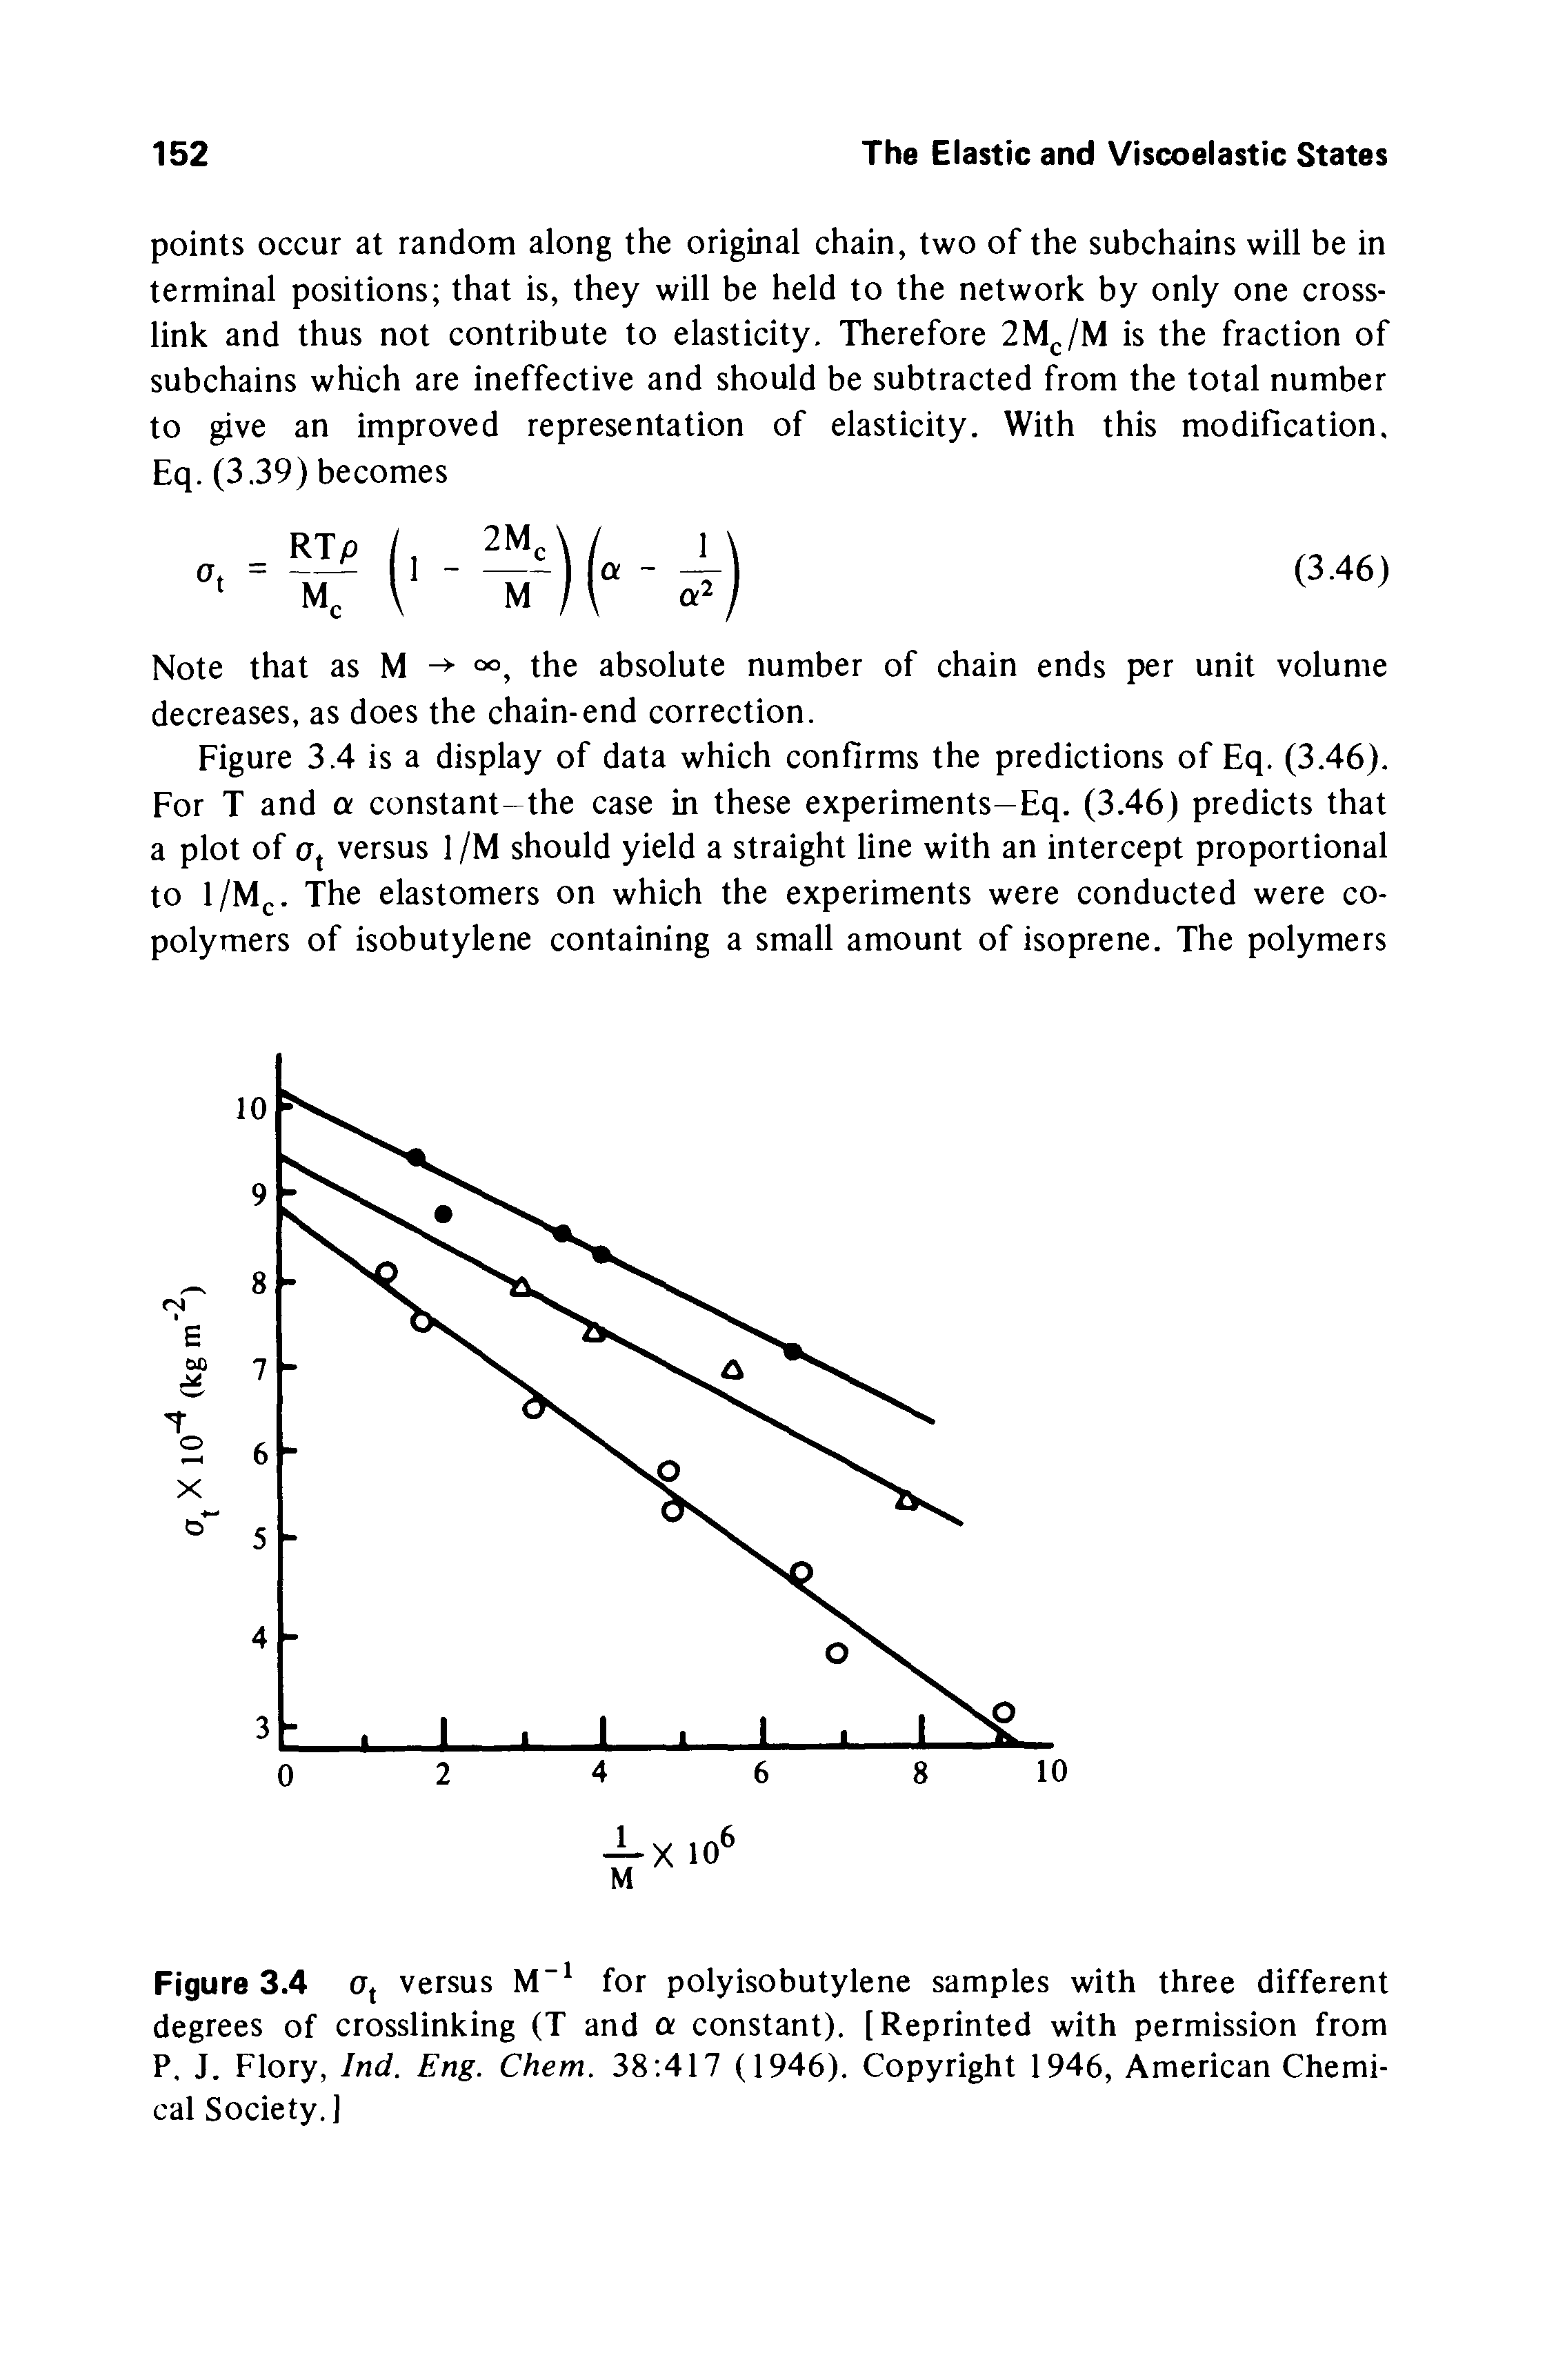 Figure 3.4 Uj versus M" for polyisobutylene samples with three different degrees of crosslinking (T and a constant). [Reprinted with permission from P, J. Flory, Ind. Eng. Chem. 38 417 (1946). Copyright 1946, American Chemical Society.]...